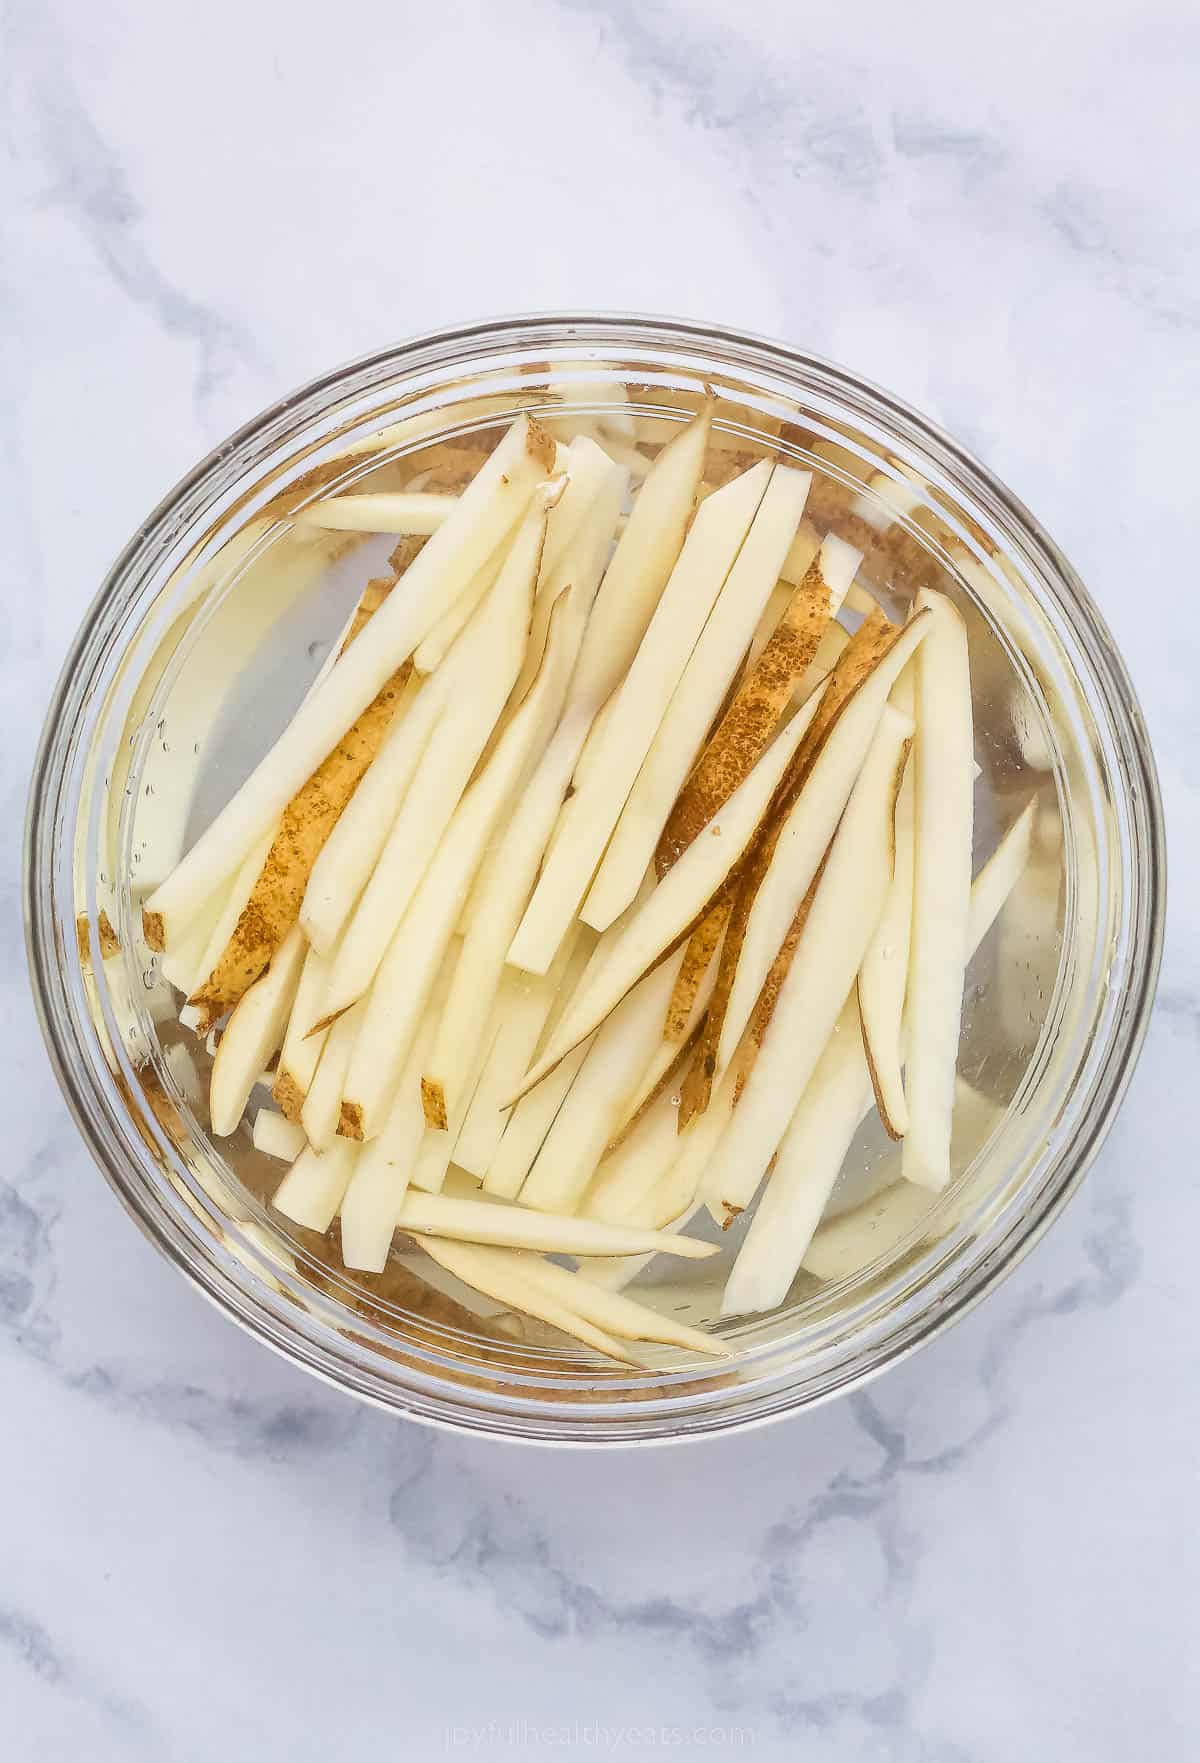 Soaking the fries in cold water.